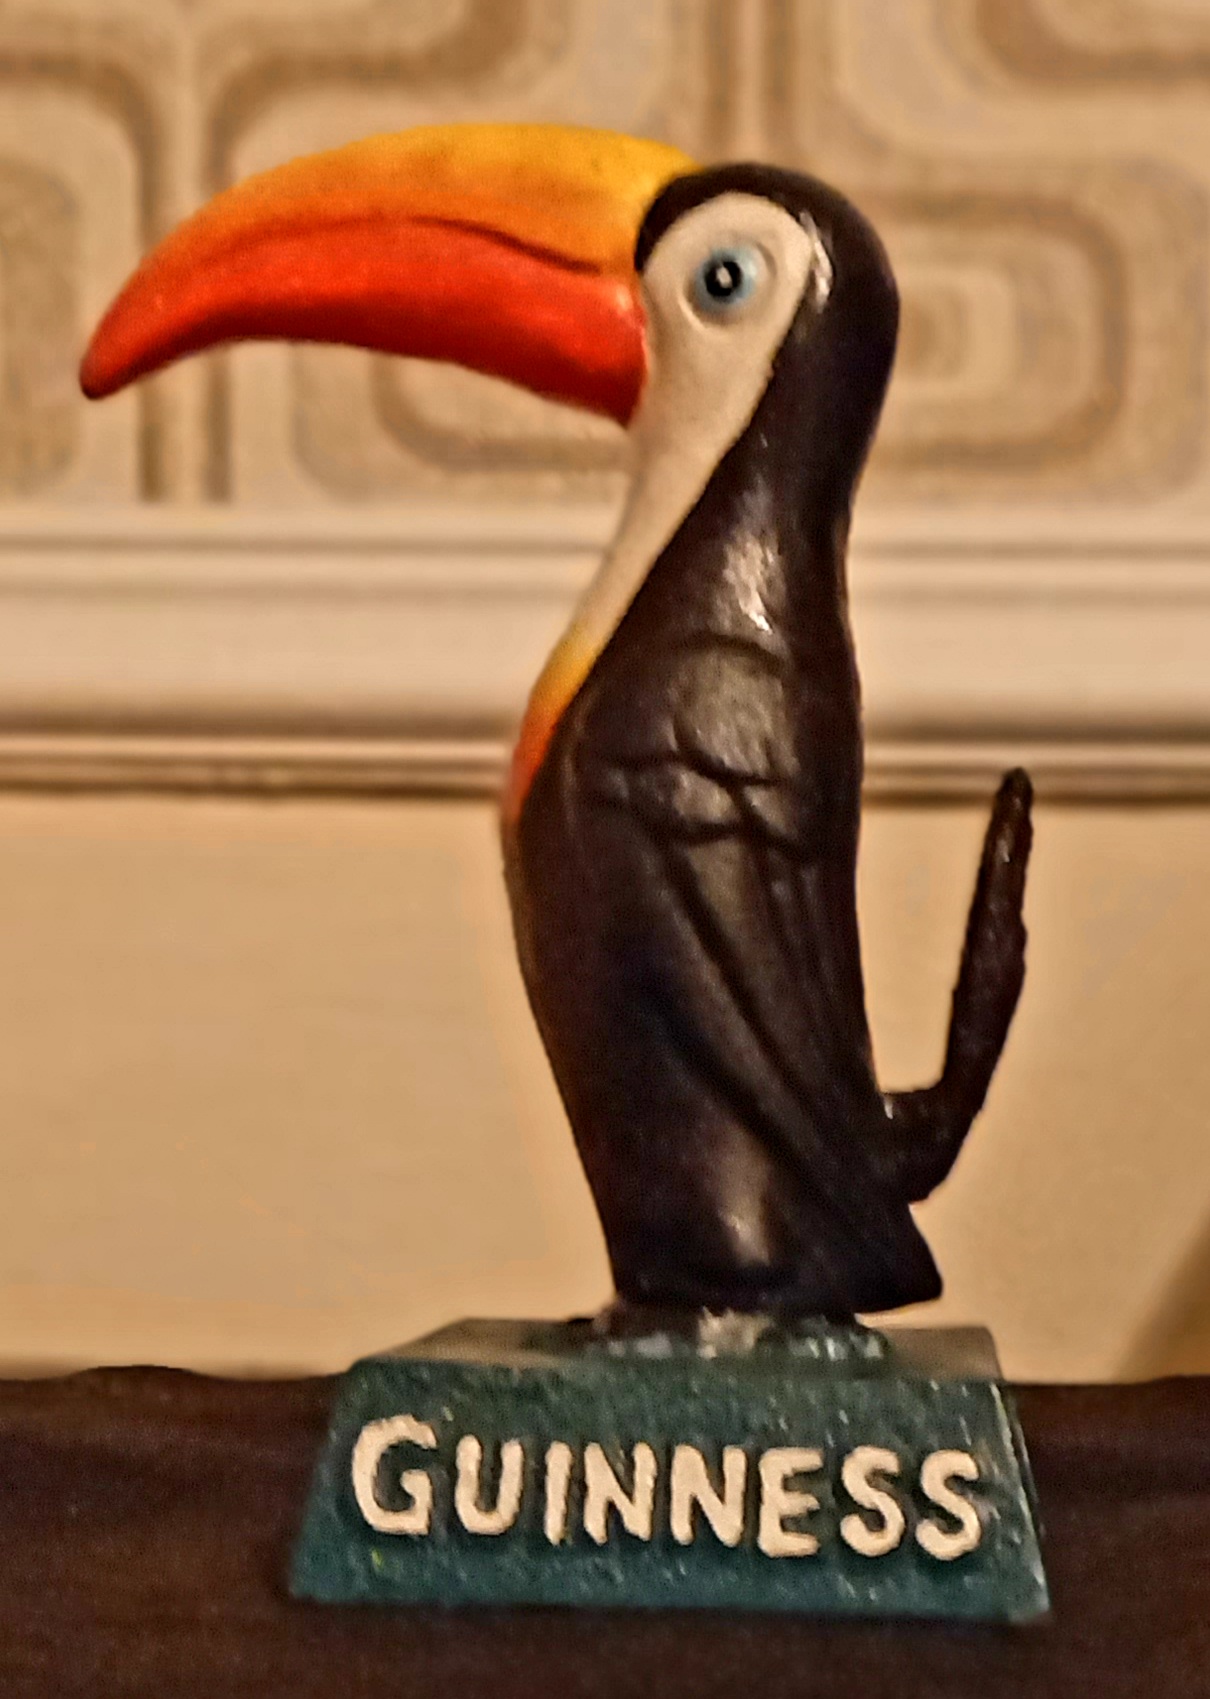 Cast Iron 'My Guinness' Advertising Toucan. - Image 2 of 3